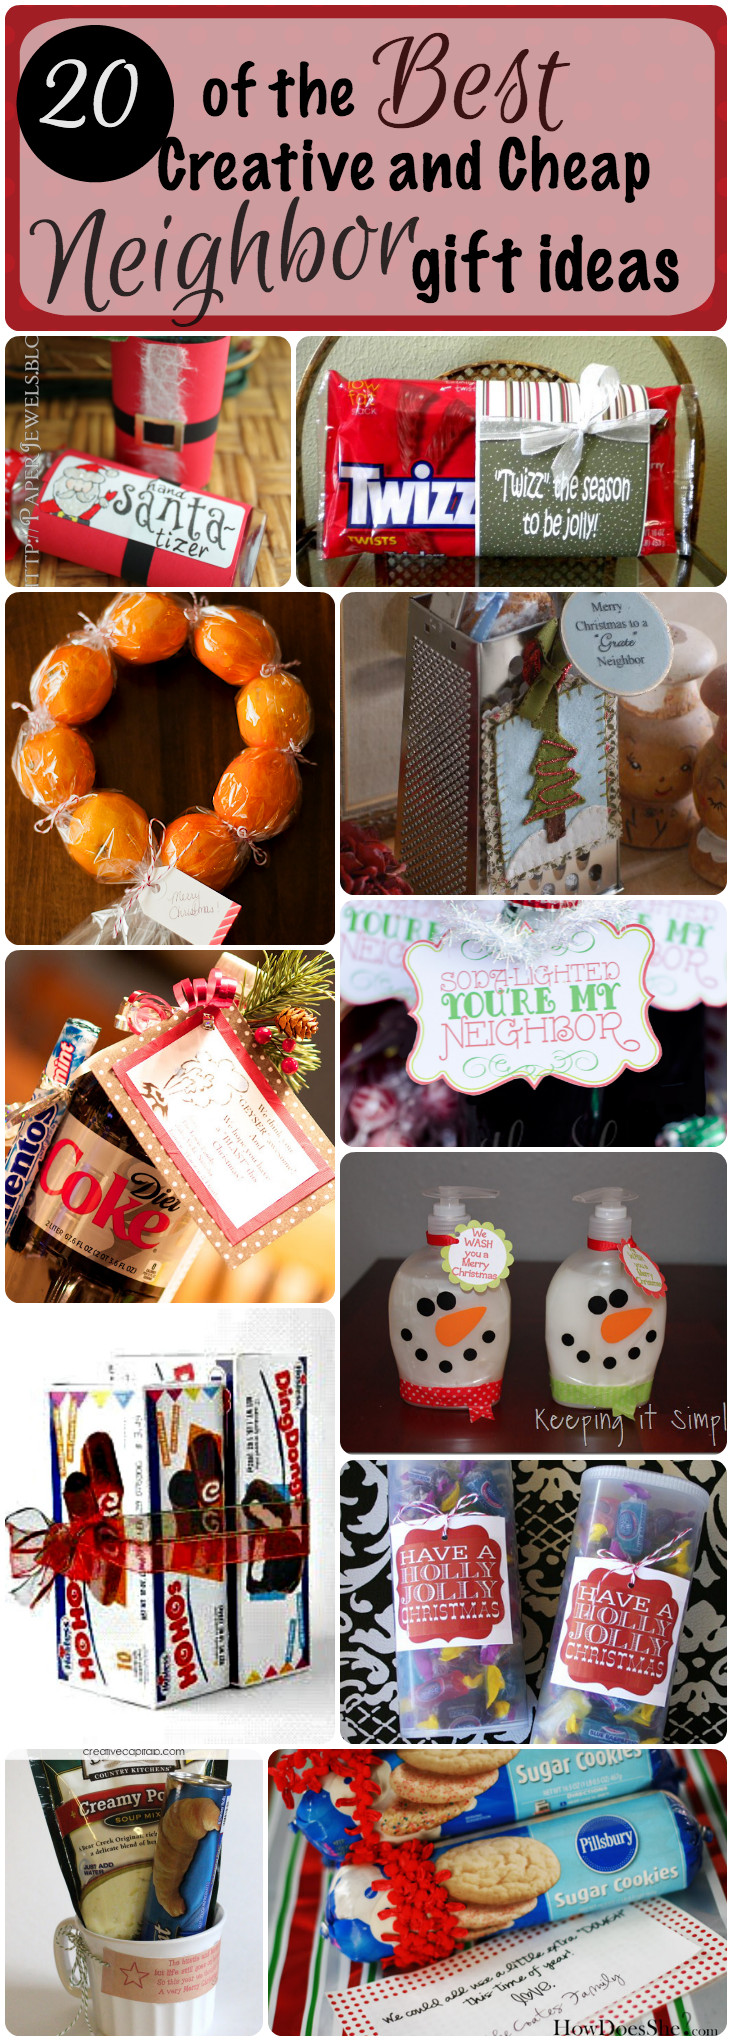 Holiday Cheap Gift Ideas
 20 Best Creative And Cheap Neighbor Gifts For Christmas